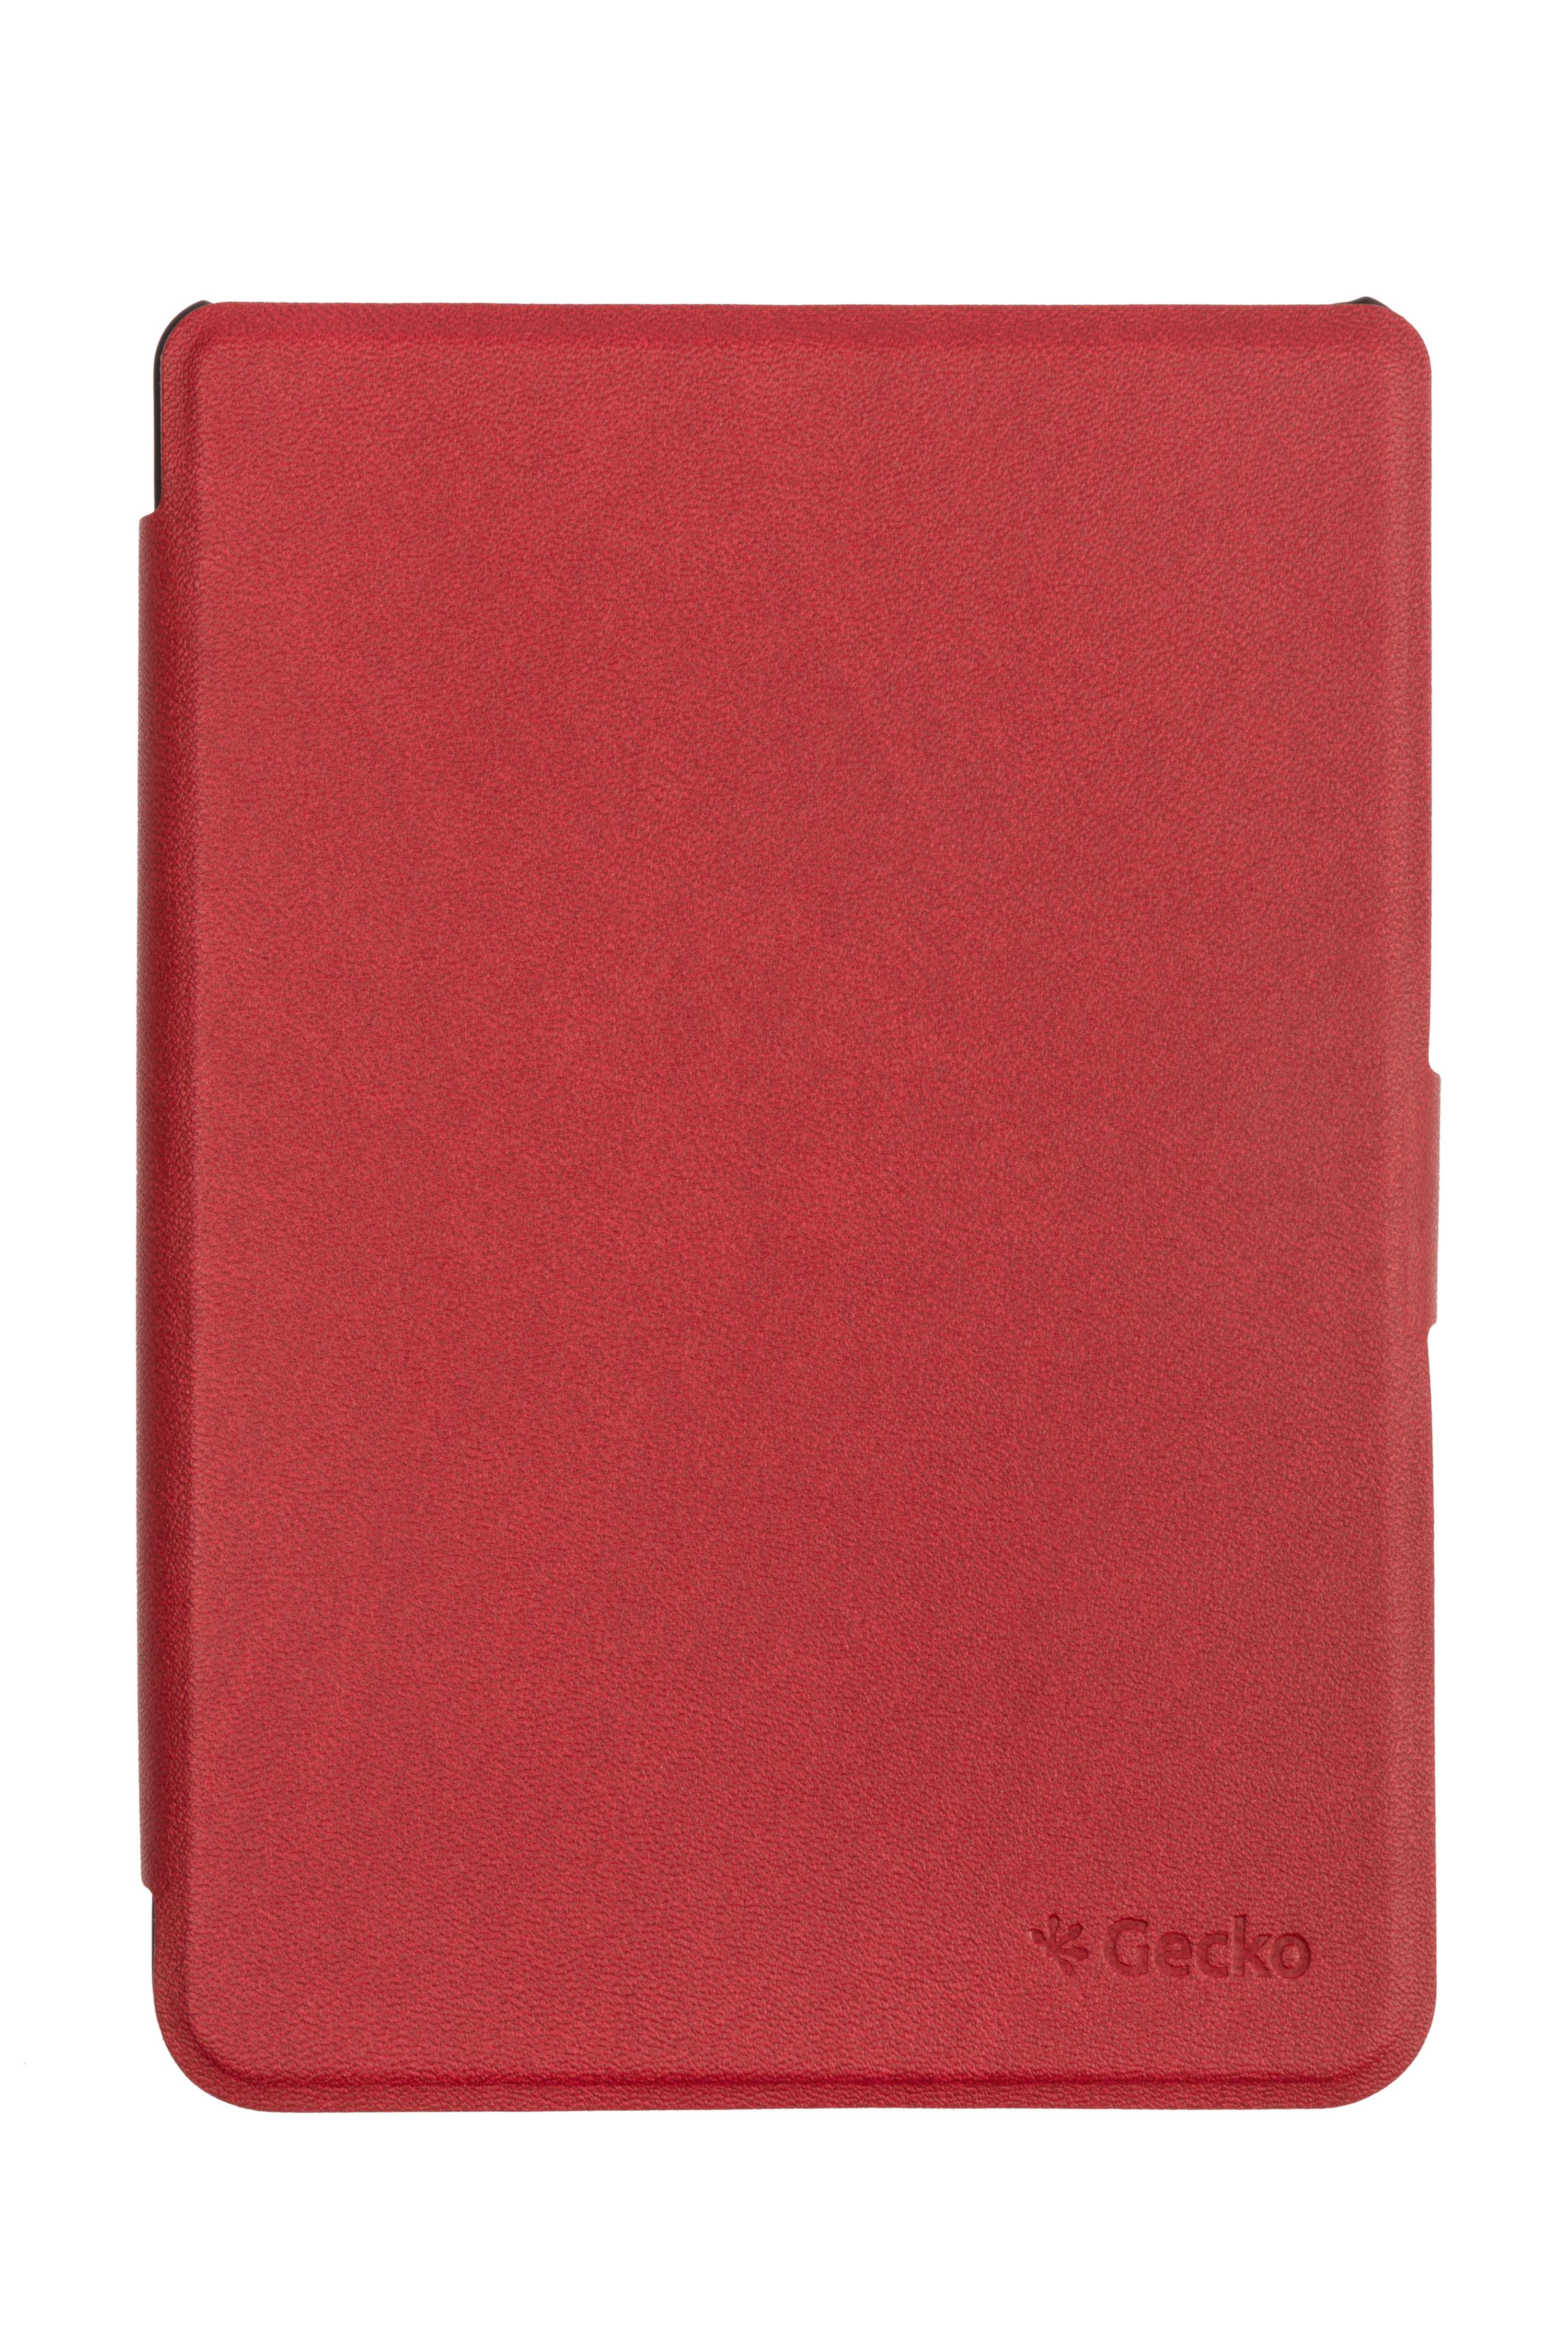 GECKO COVERS Easy-Click PU Rot E-reader cover für Kobo 2.0 Leather, Bookcover Cover